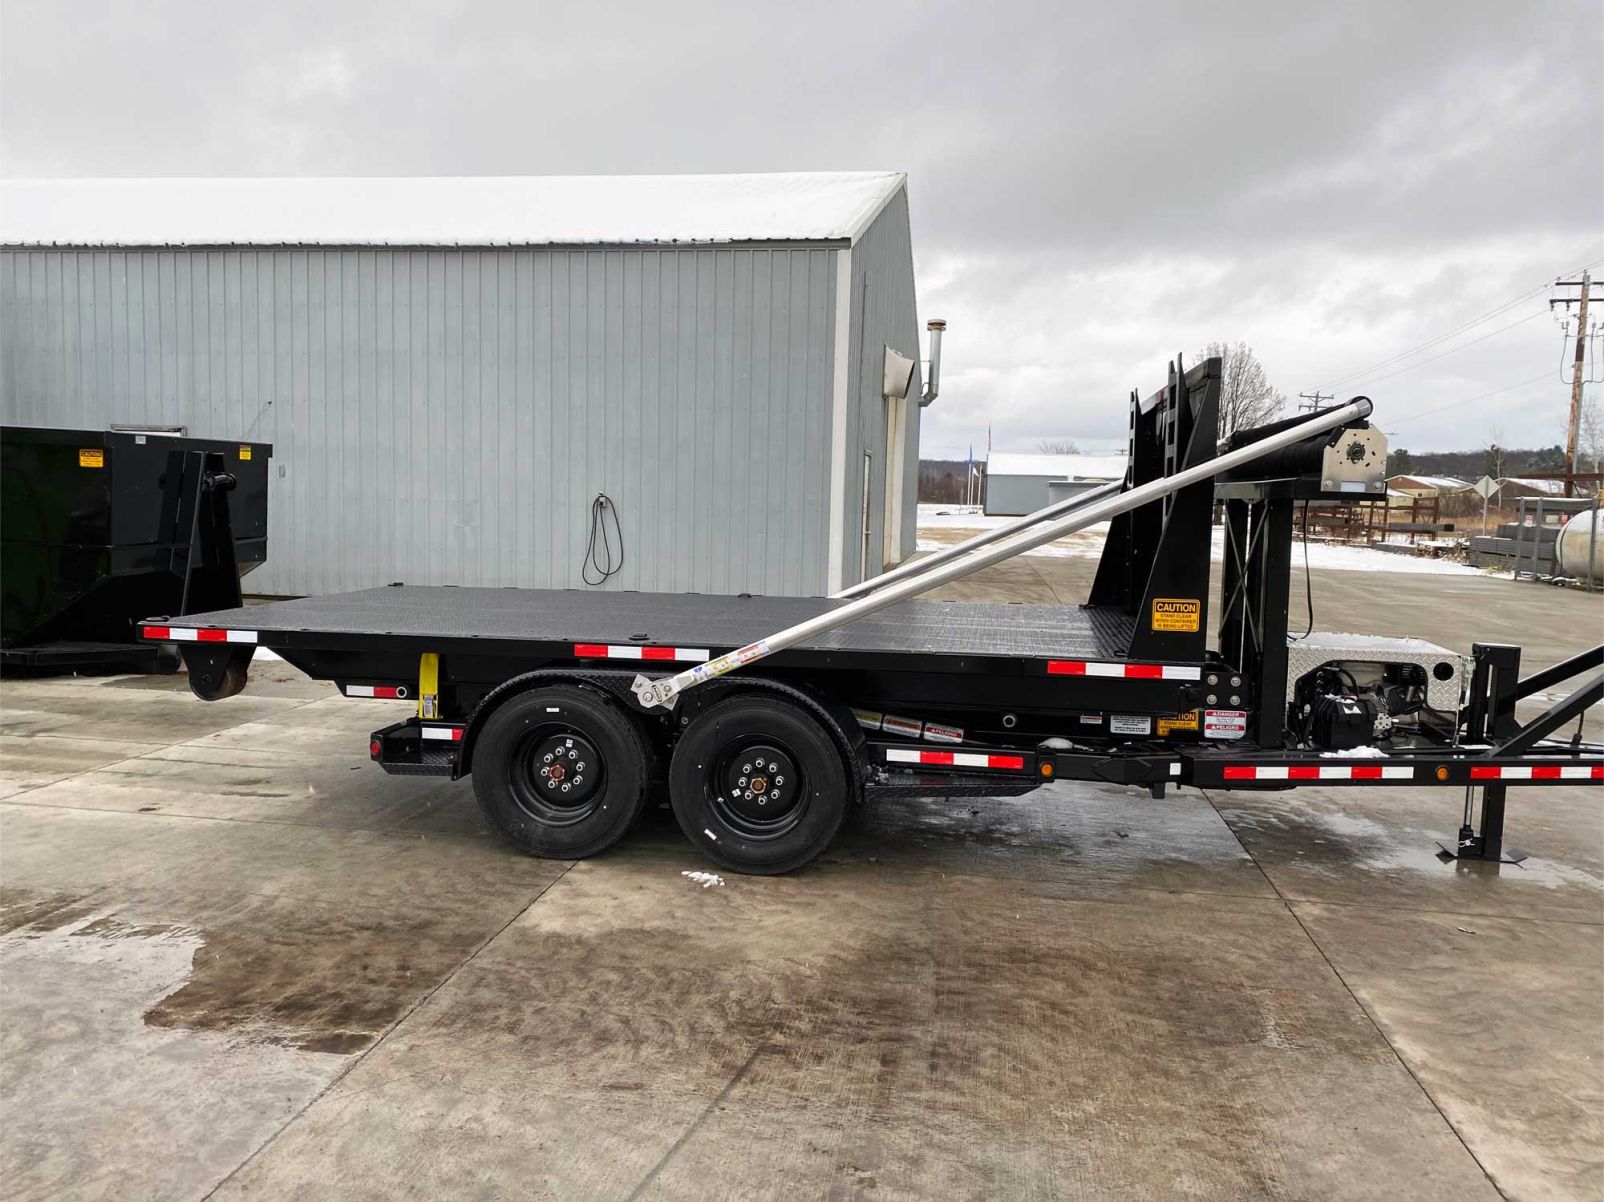 How To Lease a Flatbed Trailer for Business